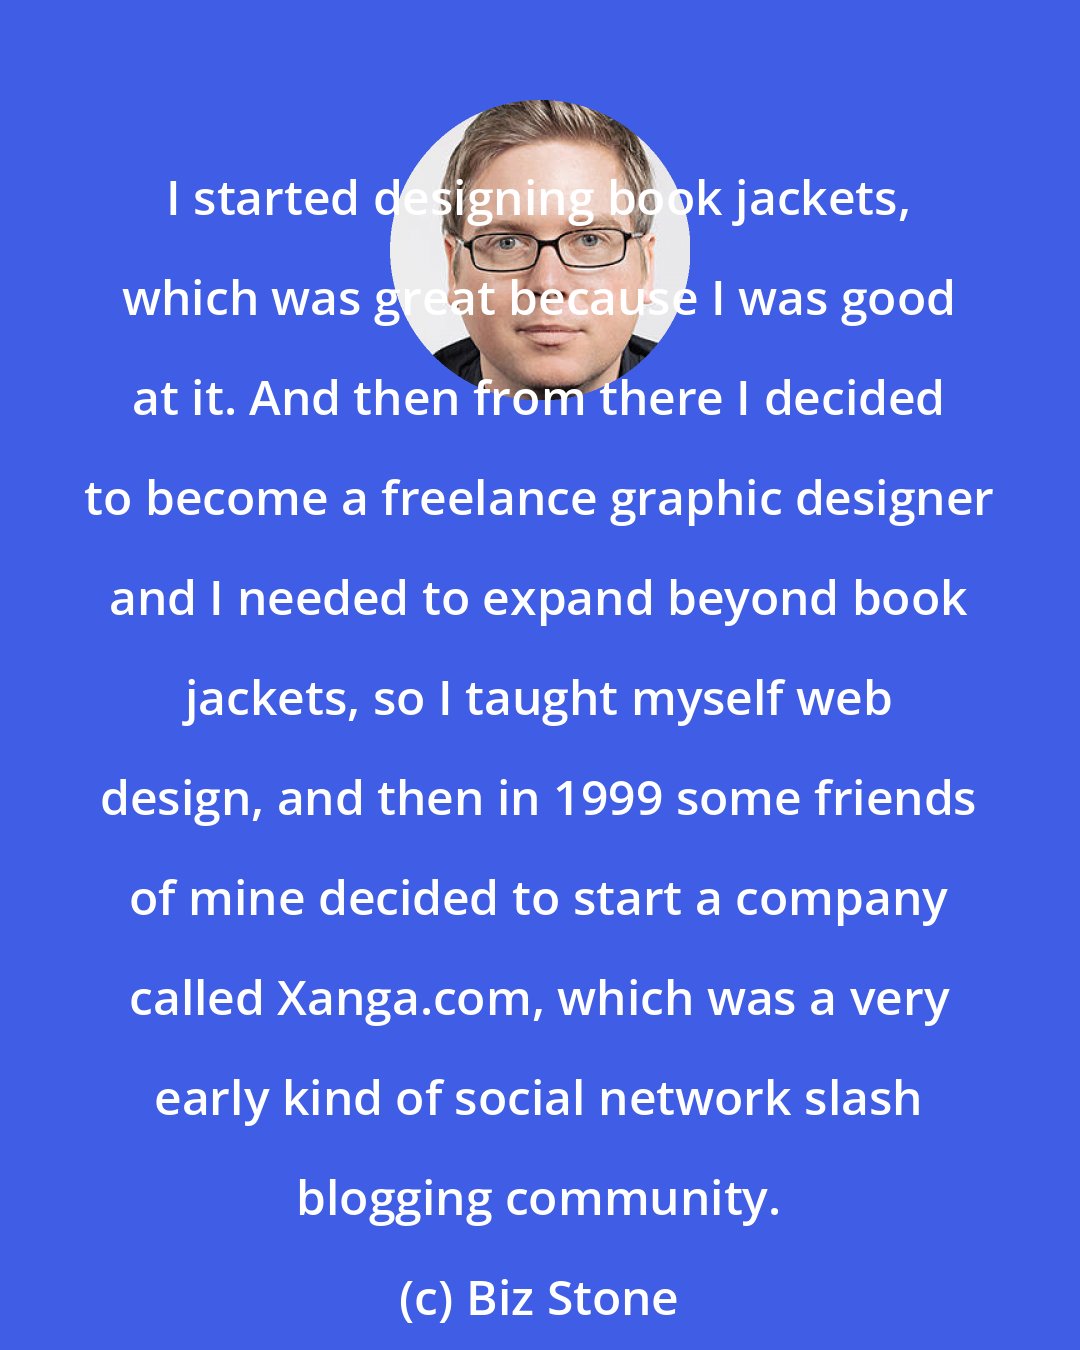 Biz Stone: I started designing book jackets, which was great because I was good at it. And then from there I decided to become a freelance graphic designer and I needed to expand beyond book jackets, so I taught myself web design, and then in 1999 some friends of mine decided to start a company called Xanga.com, which was a very early kind of social network slash blogging community.